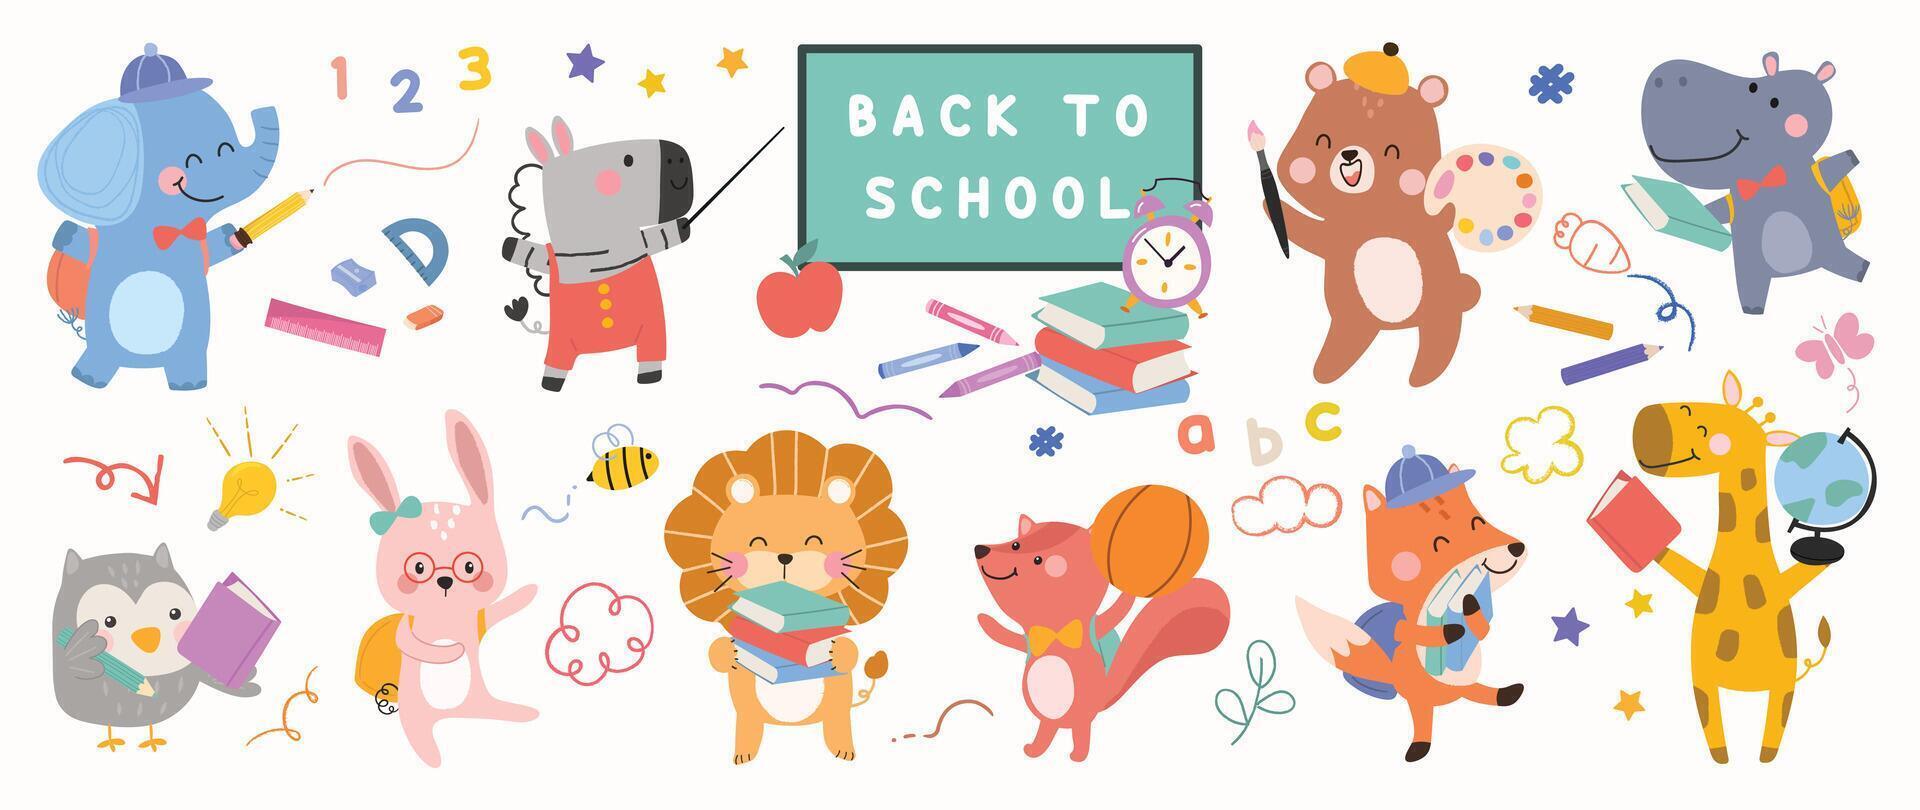 Back to School concept animal set. Collection of adorable wildlife, rabbit, squirrel, bear, fox, elephant. School with funny animal character illustration for greeting card, kids, education. vector